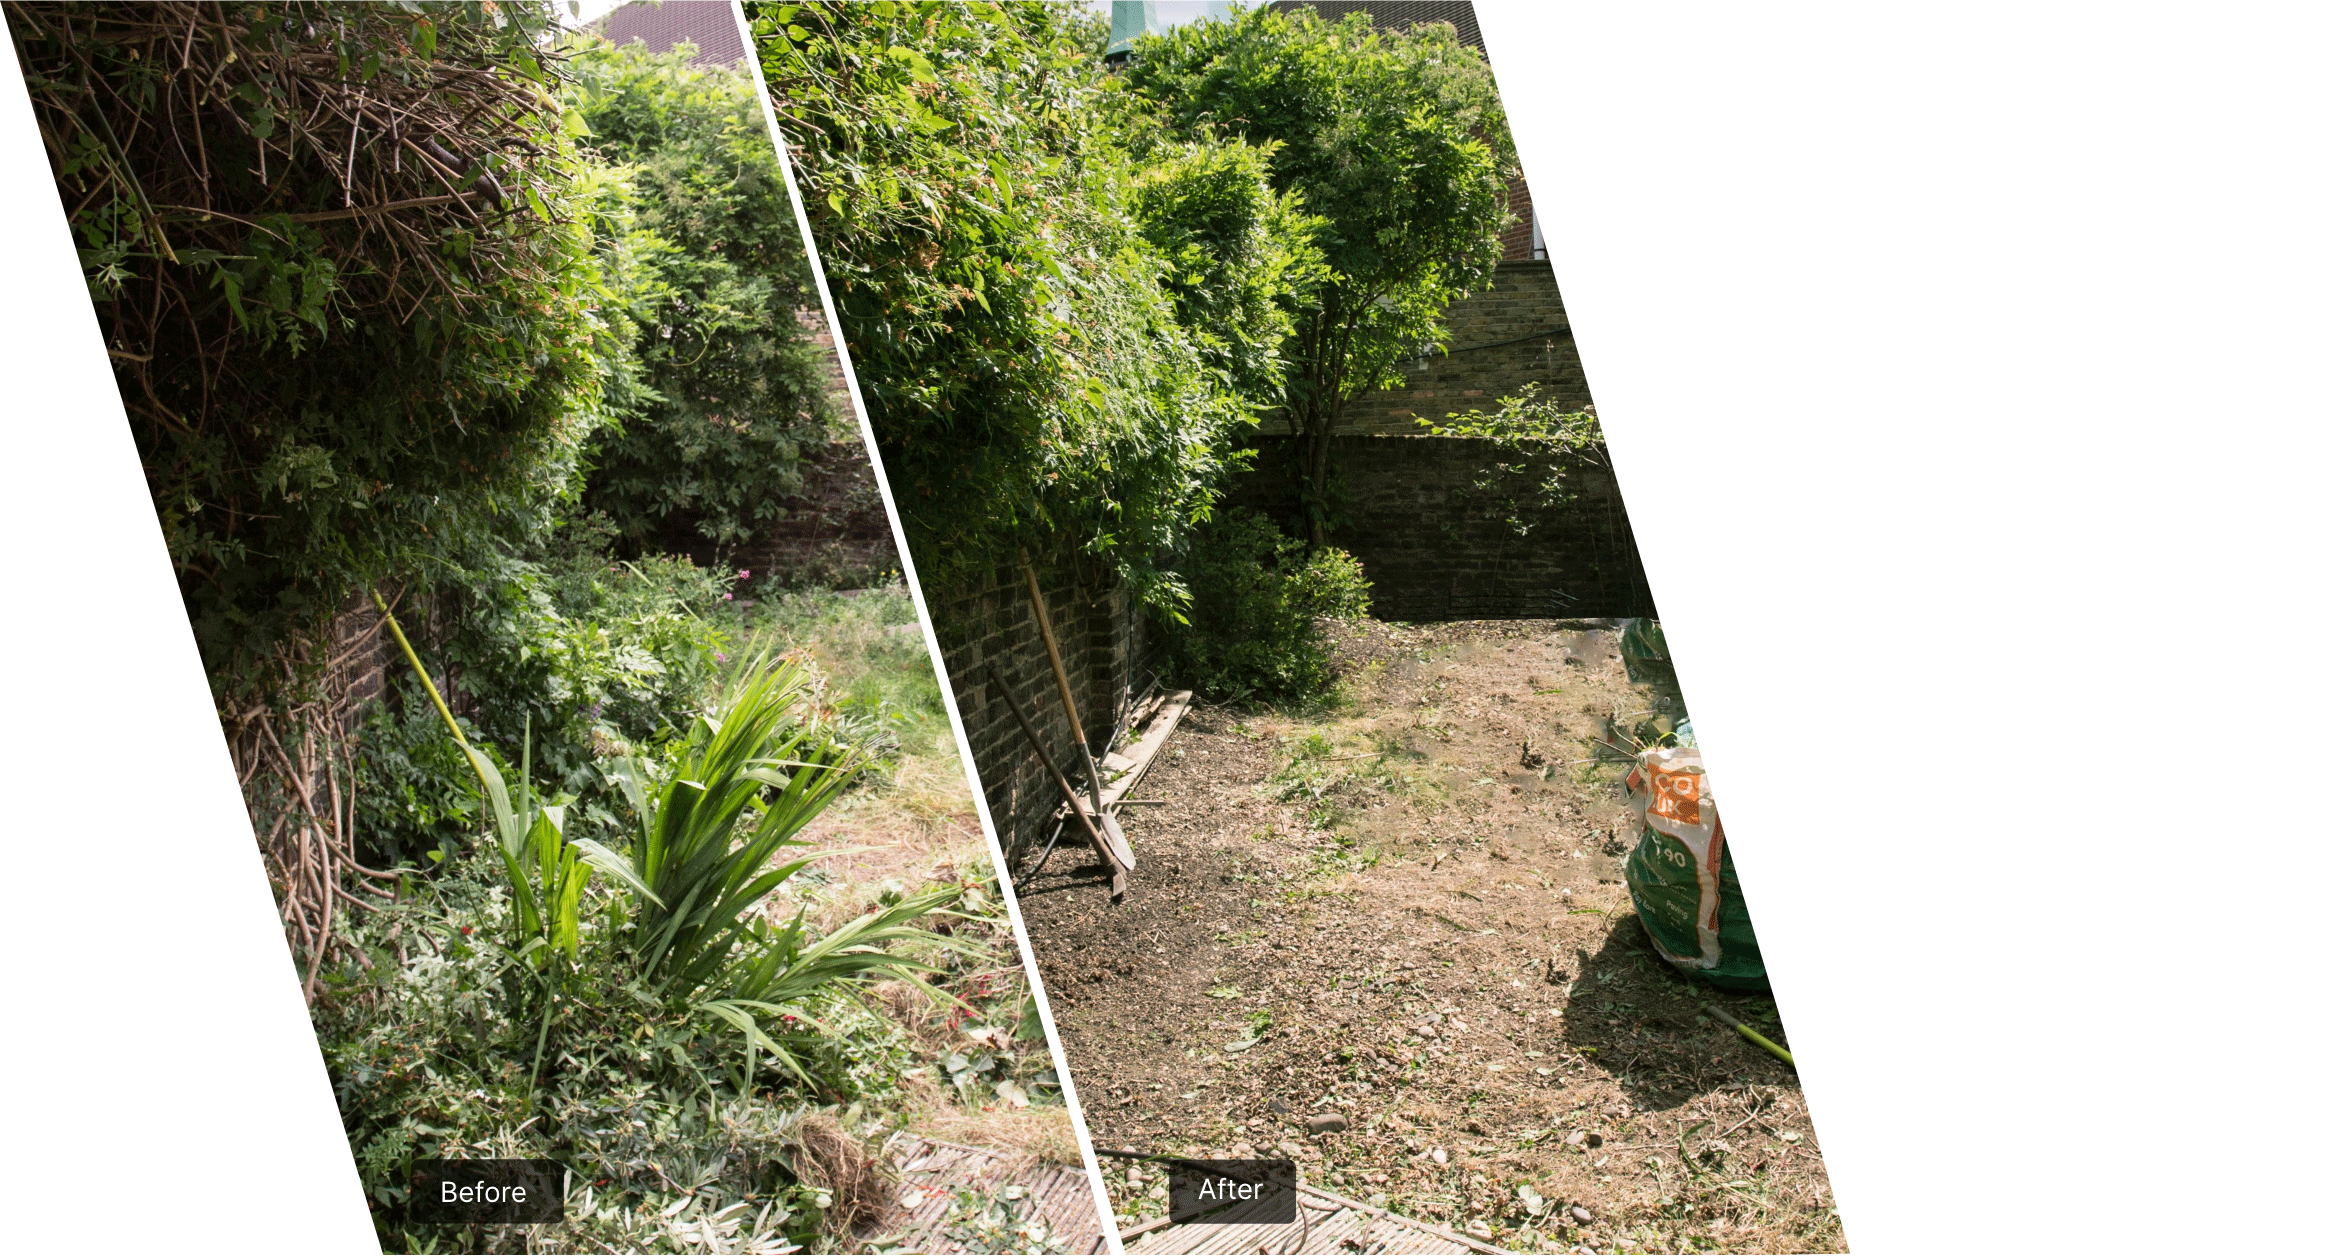 The image shows a before-and-after collage of photos of one corner of a garden. On the left side, the garden is overgrown. The right side photo is of the same corner but it has been cleared and it looks neat and maintained.